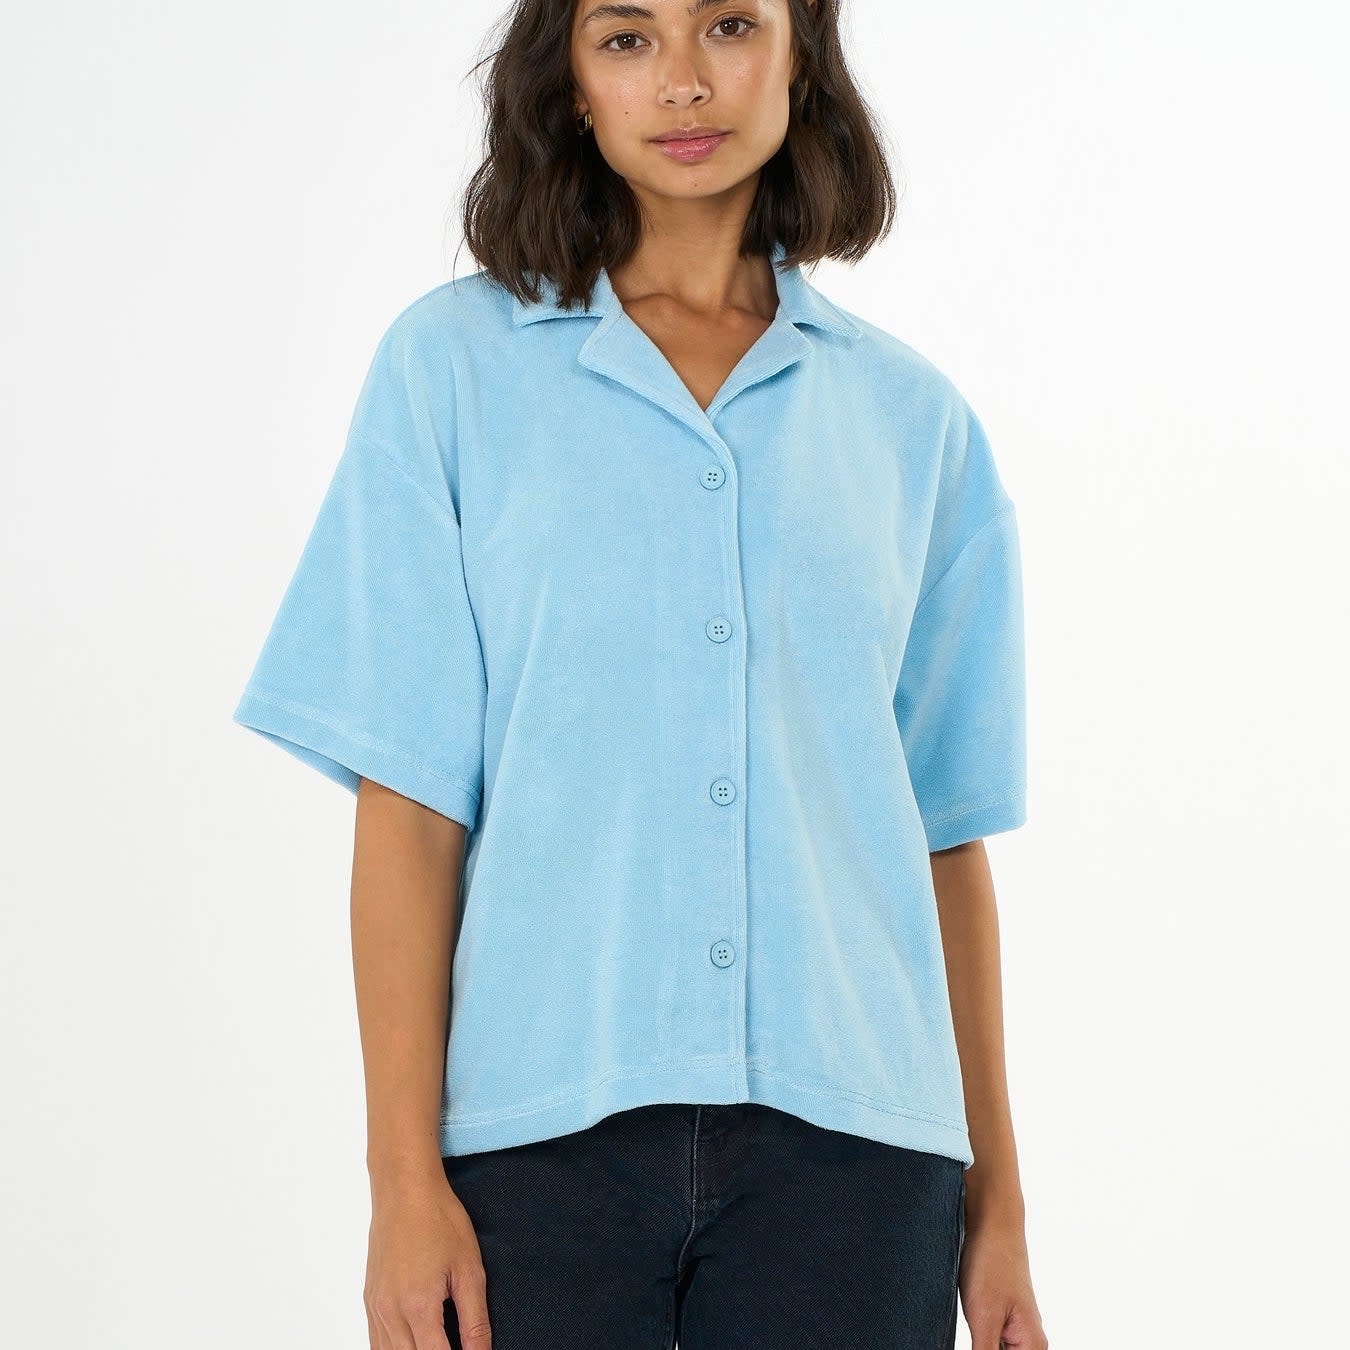 KnowledgeCotton Apparel KnowledgeCotton, Terry Shirt, airy blue, XS